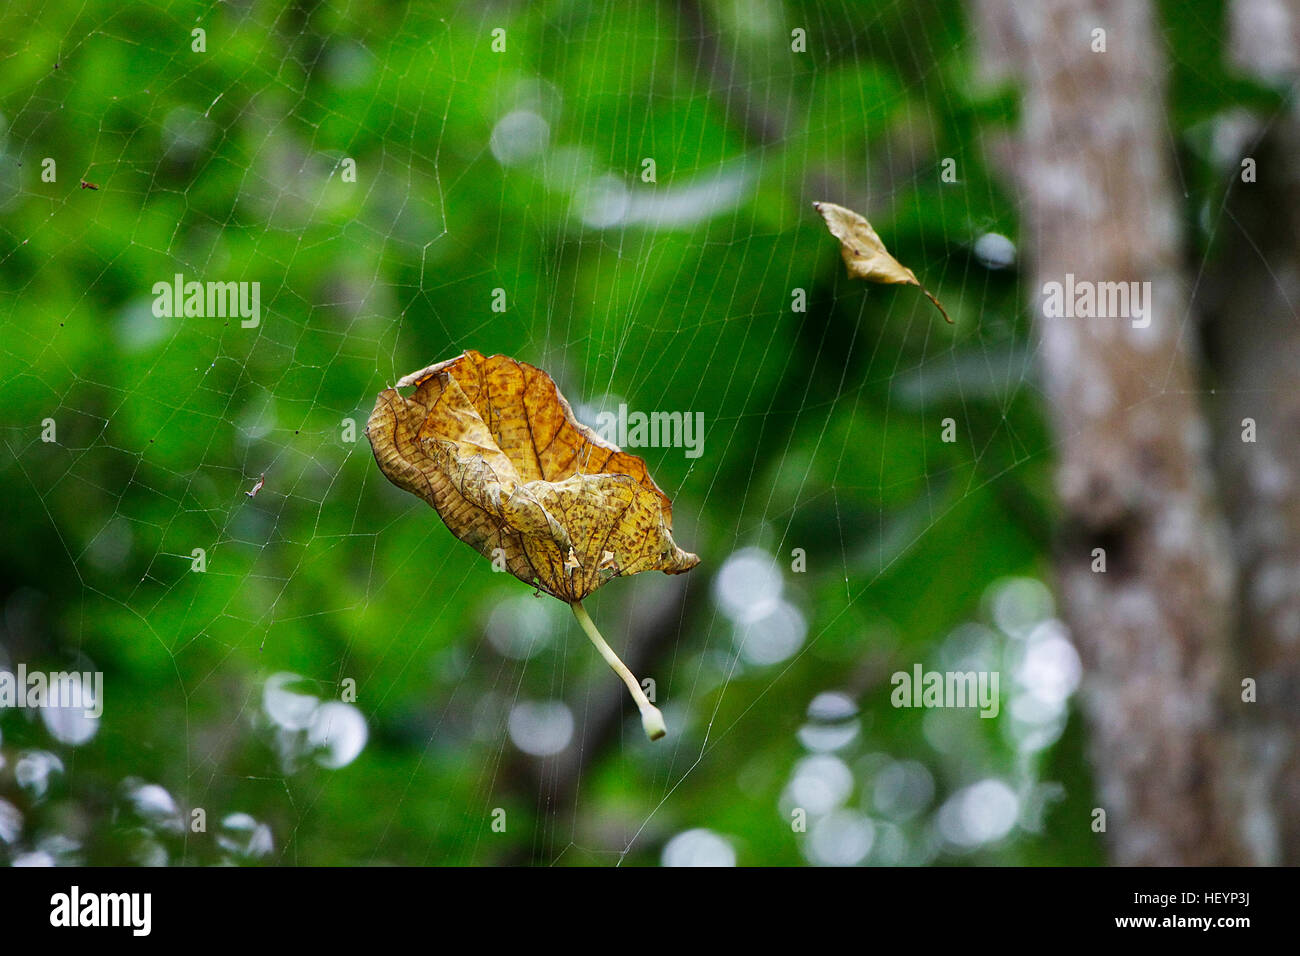 Leaf caught in spider web. Stock Photo